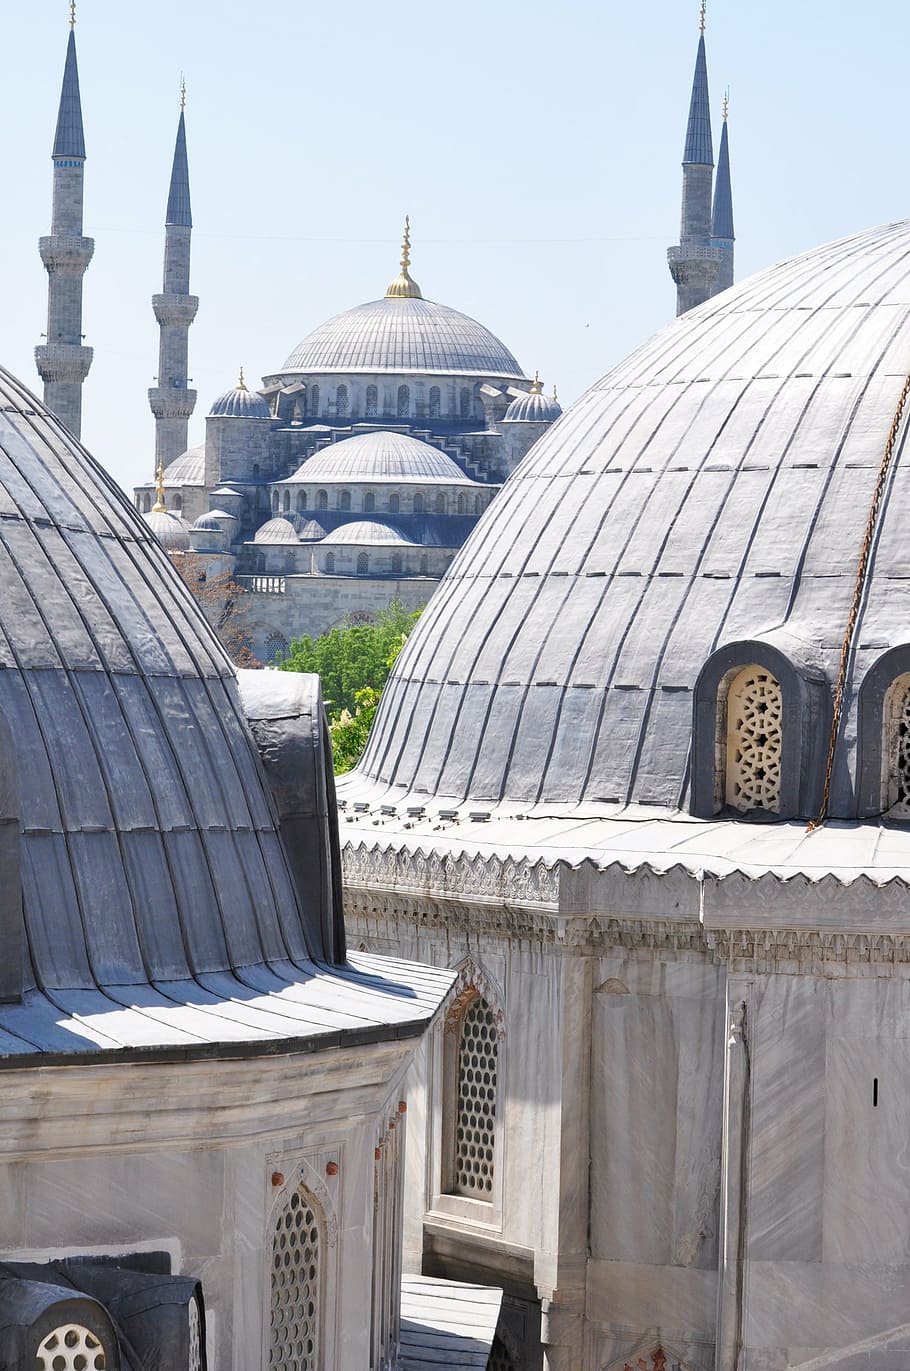 taj mahal, blue mosque, istanbul, turkey, mosque, architecture, monument, religious monuments, blue, roofs